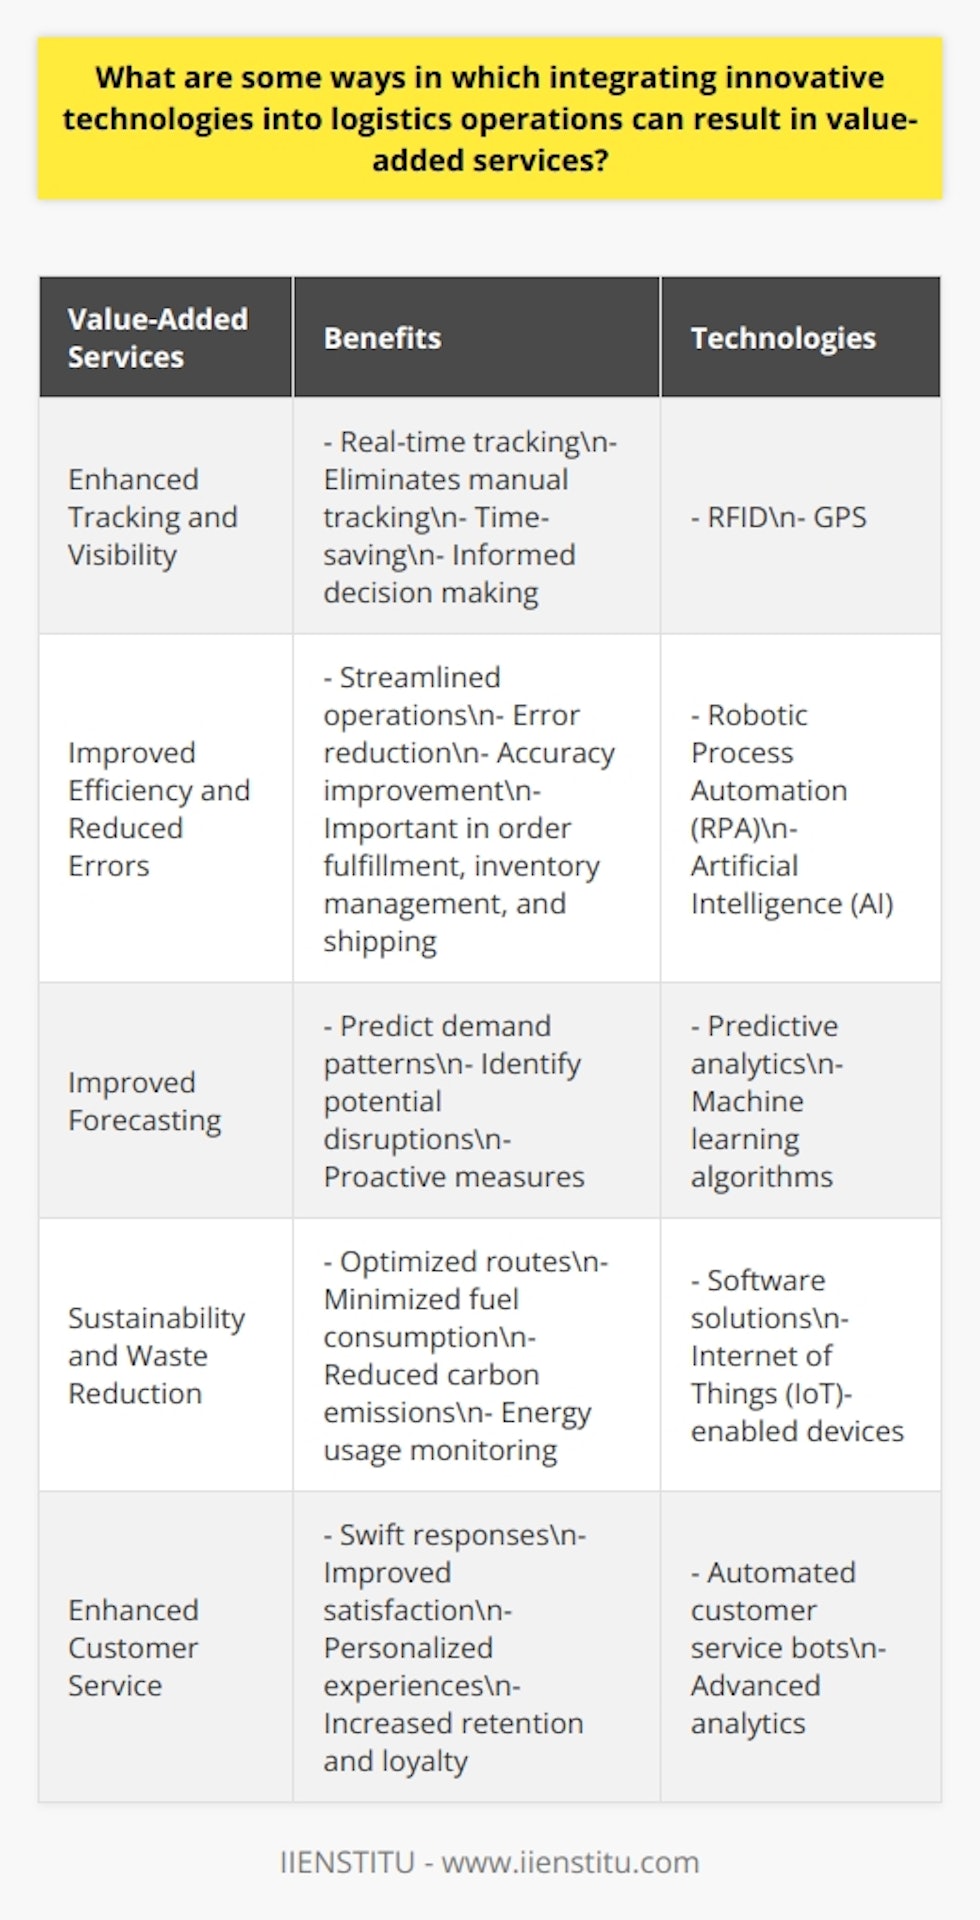 Integrating innovative technologies into logistics operations can provide a range of value-added services. One of the key benefits is enhanced tracking and visibility. Technologies such as RFID and GPS enable real-time tracking, eliminating the need for manual tracking and saving valuable time. Real-time updates also enable more informed decision making.Another advantage is improved efficiency and reduced errors. Robotic Process Automation (RPA) and Artificial Intelligence (AI) can be utilized to streamline logistical operations, reducing the likelihood of errors. This improvement in accuracy is particularly important in processes such as order fulfillment, inventory management, and shipping.The integration of predictive analytics into logistics can also lead to improved forecasting. Machine learning algorithms can analyze data to predict demand patterns and identify potential disruptions in the supply chain. This foreknowledge allows companies to take proactive measures, ensuring a smoother and more reliable logistical operation.In addition to efficiency and forecasting, technology can contribute to sustainability and waste reduction. Software solutions can optimize routes, minimizing fuel consumption and carbon emissions. Internet of Things (IoT)-enabled devices can also monitor energy usage, supporting efforts to reduce waste.Furthermore, innovative technologies can enhance customer service. Automated customer service bots can provide swift responses to customer inquiries, improving overall satisfaction. Advanced analytics can personalize customer experiences, leading to increased client retention and brand loyalty.In conclusion, integrating innovative technologies into logistics operations can result in value-added services such as enhanced tracking and visibility, improved efficiency and error reduction, better forecasting, sustainability, and enhanced customer service. The ongoing digital transformation in the logistics sector holds great potential for businesses looking to optimize their operations and provide added value to their customers.